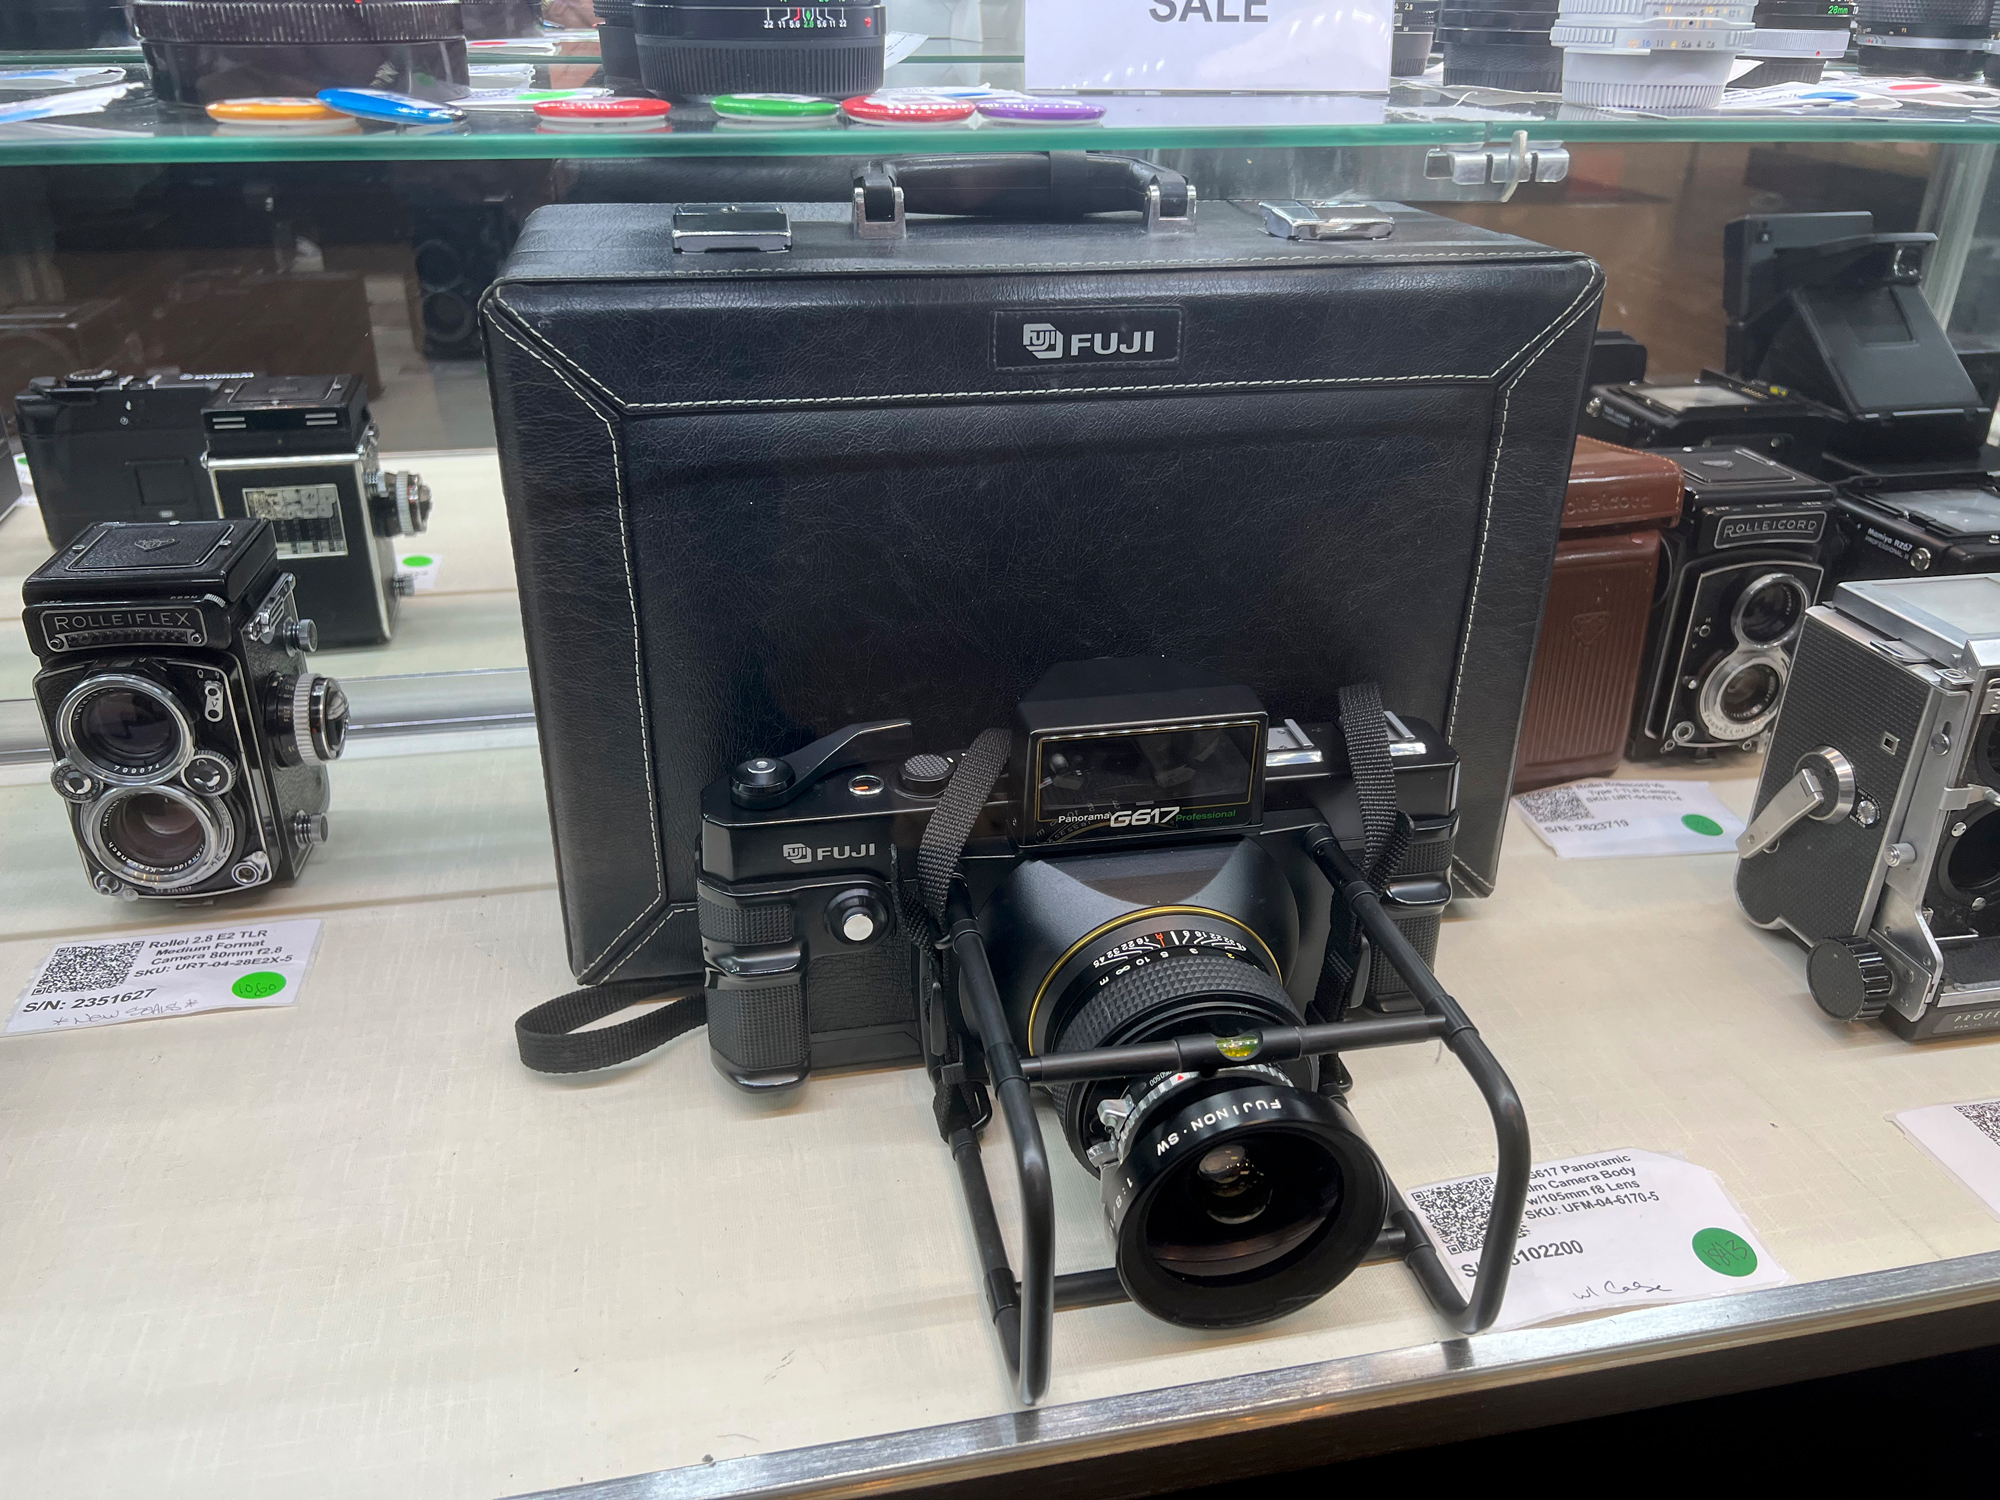 Now this is a camera. Great panos with the G617. Great condition too. And, check out that Rolleiflex.